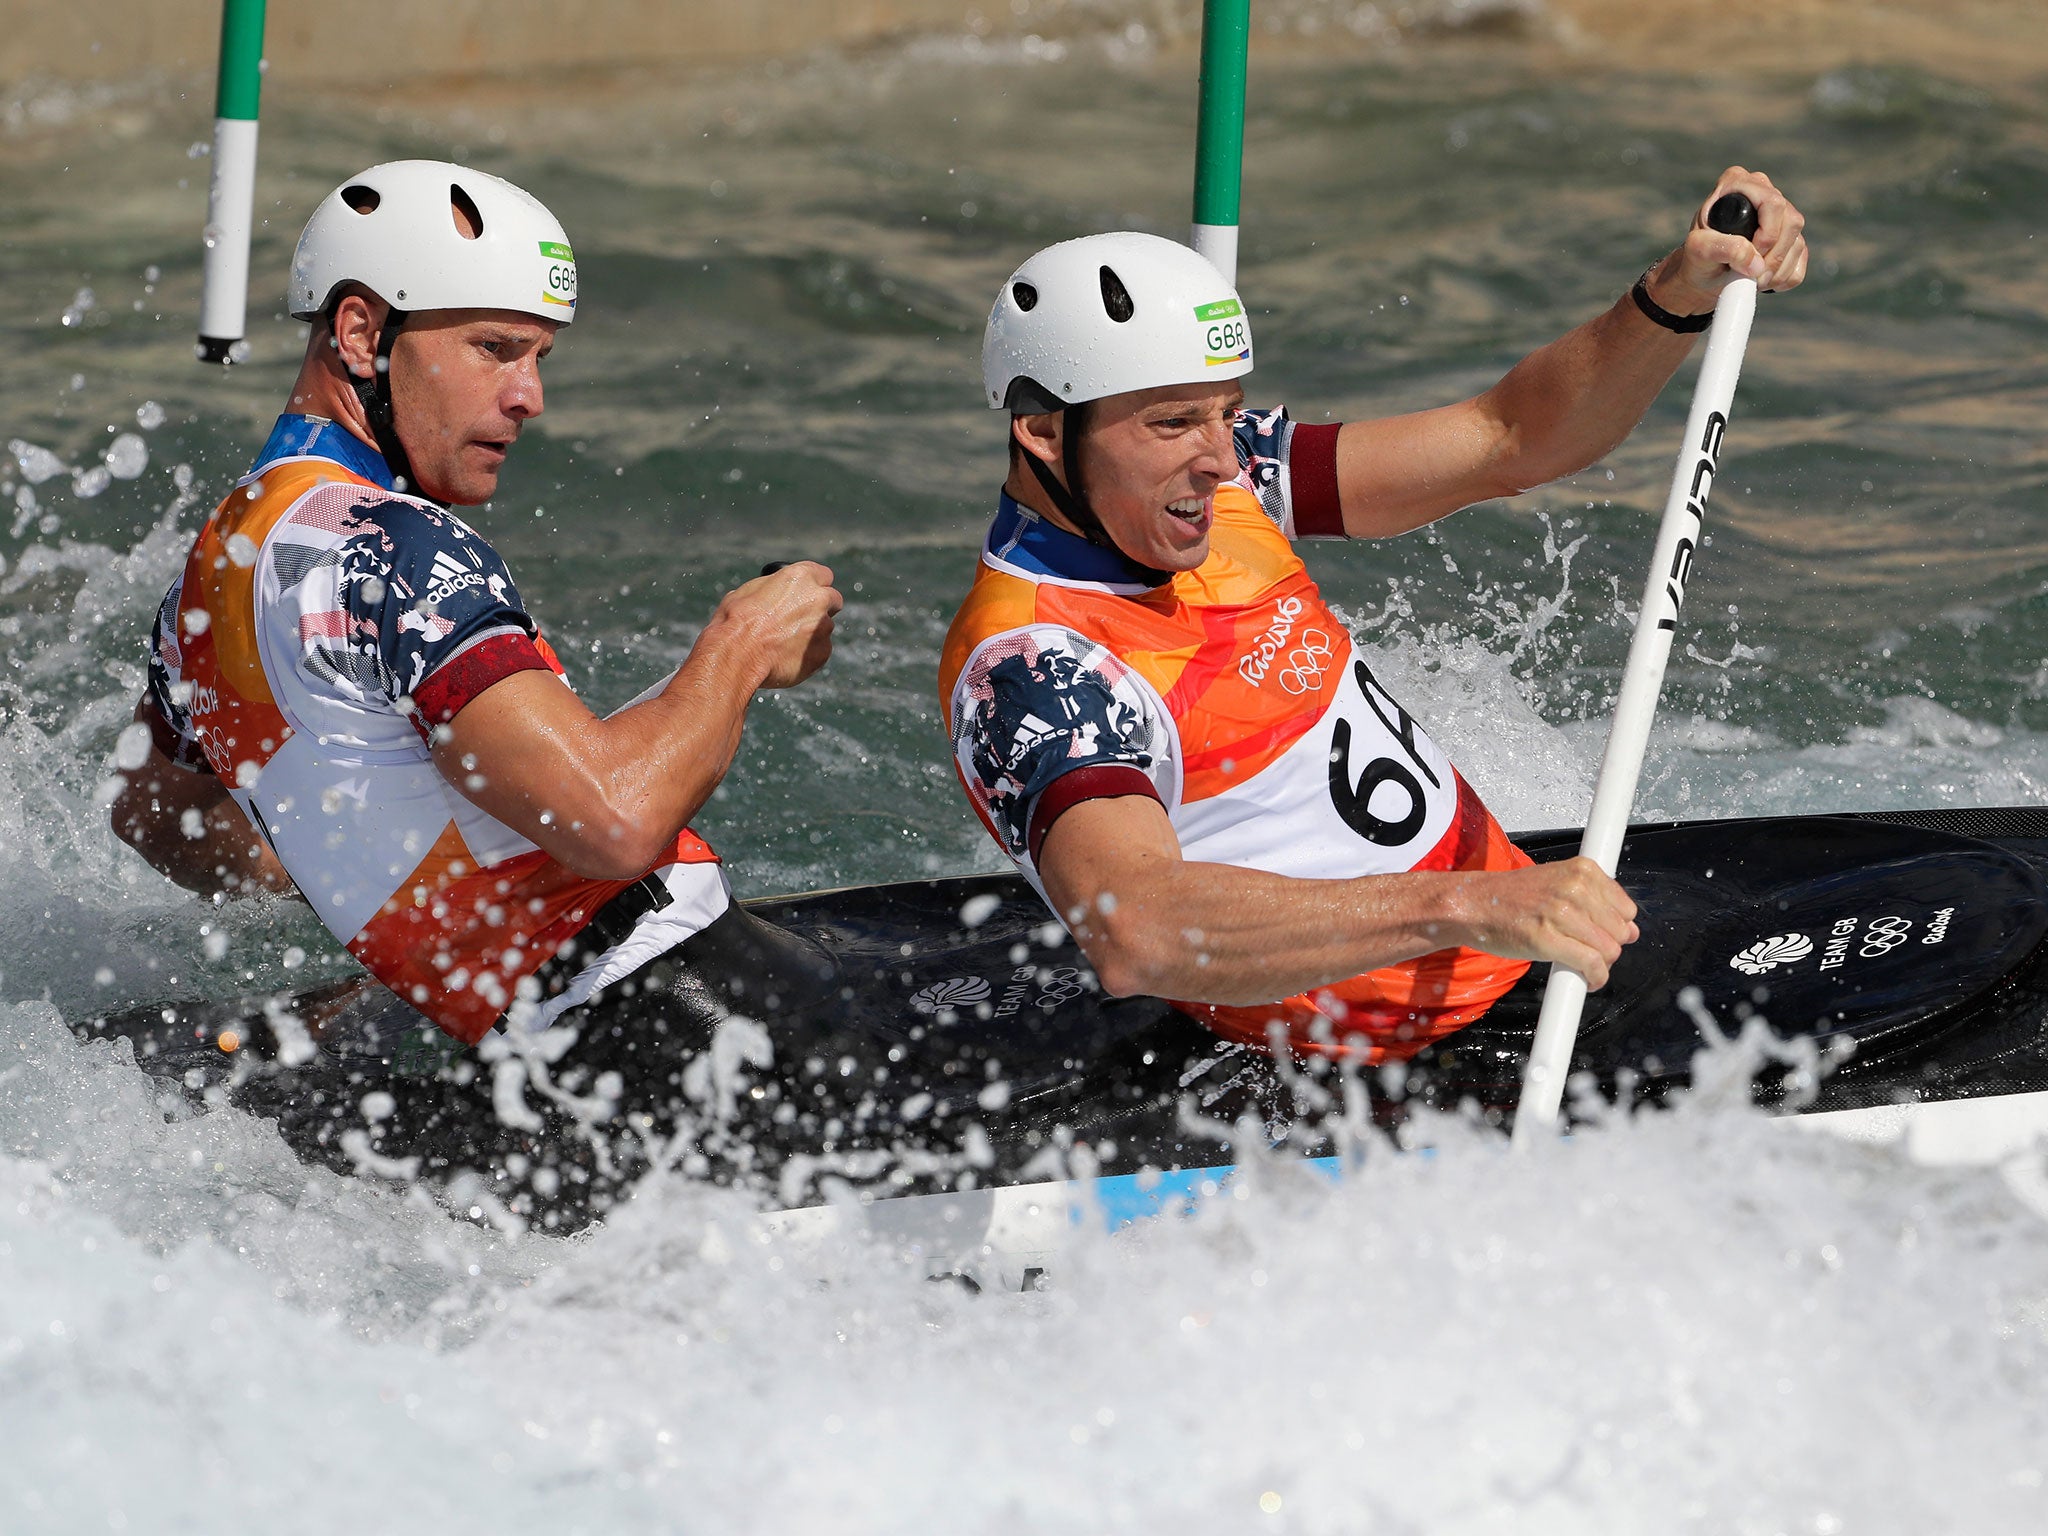 Richard Hounslow and David Florence in action in the men's canoe slalom